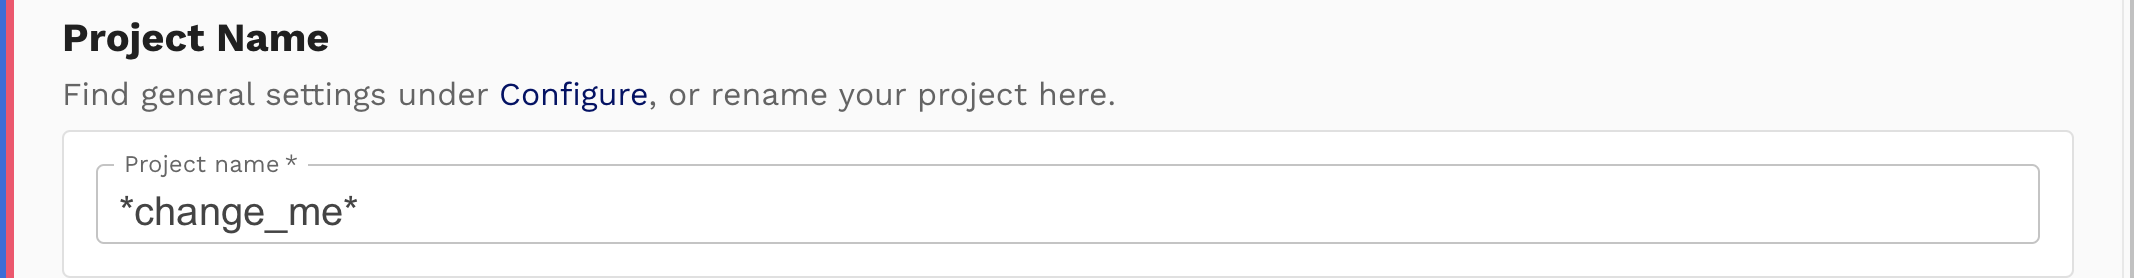 SOOS UI Manage page showing editable Project Name field